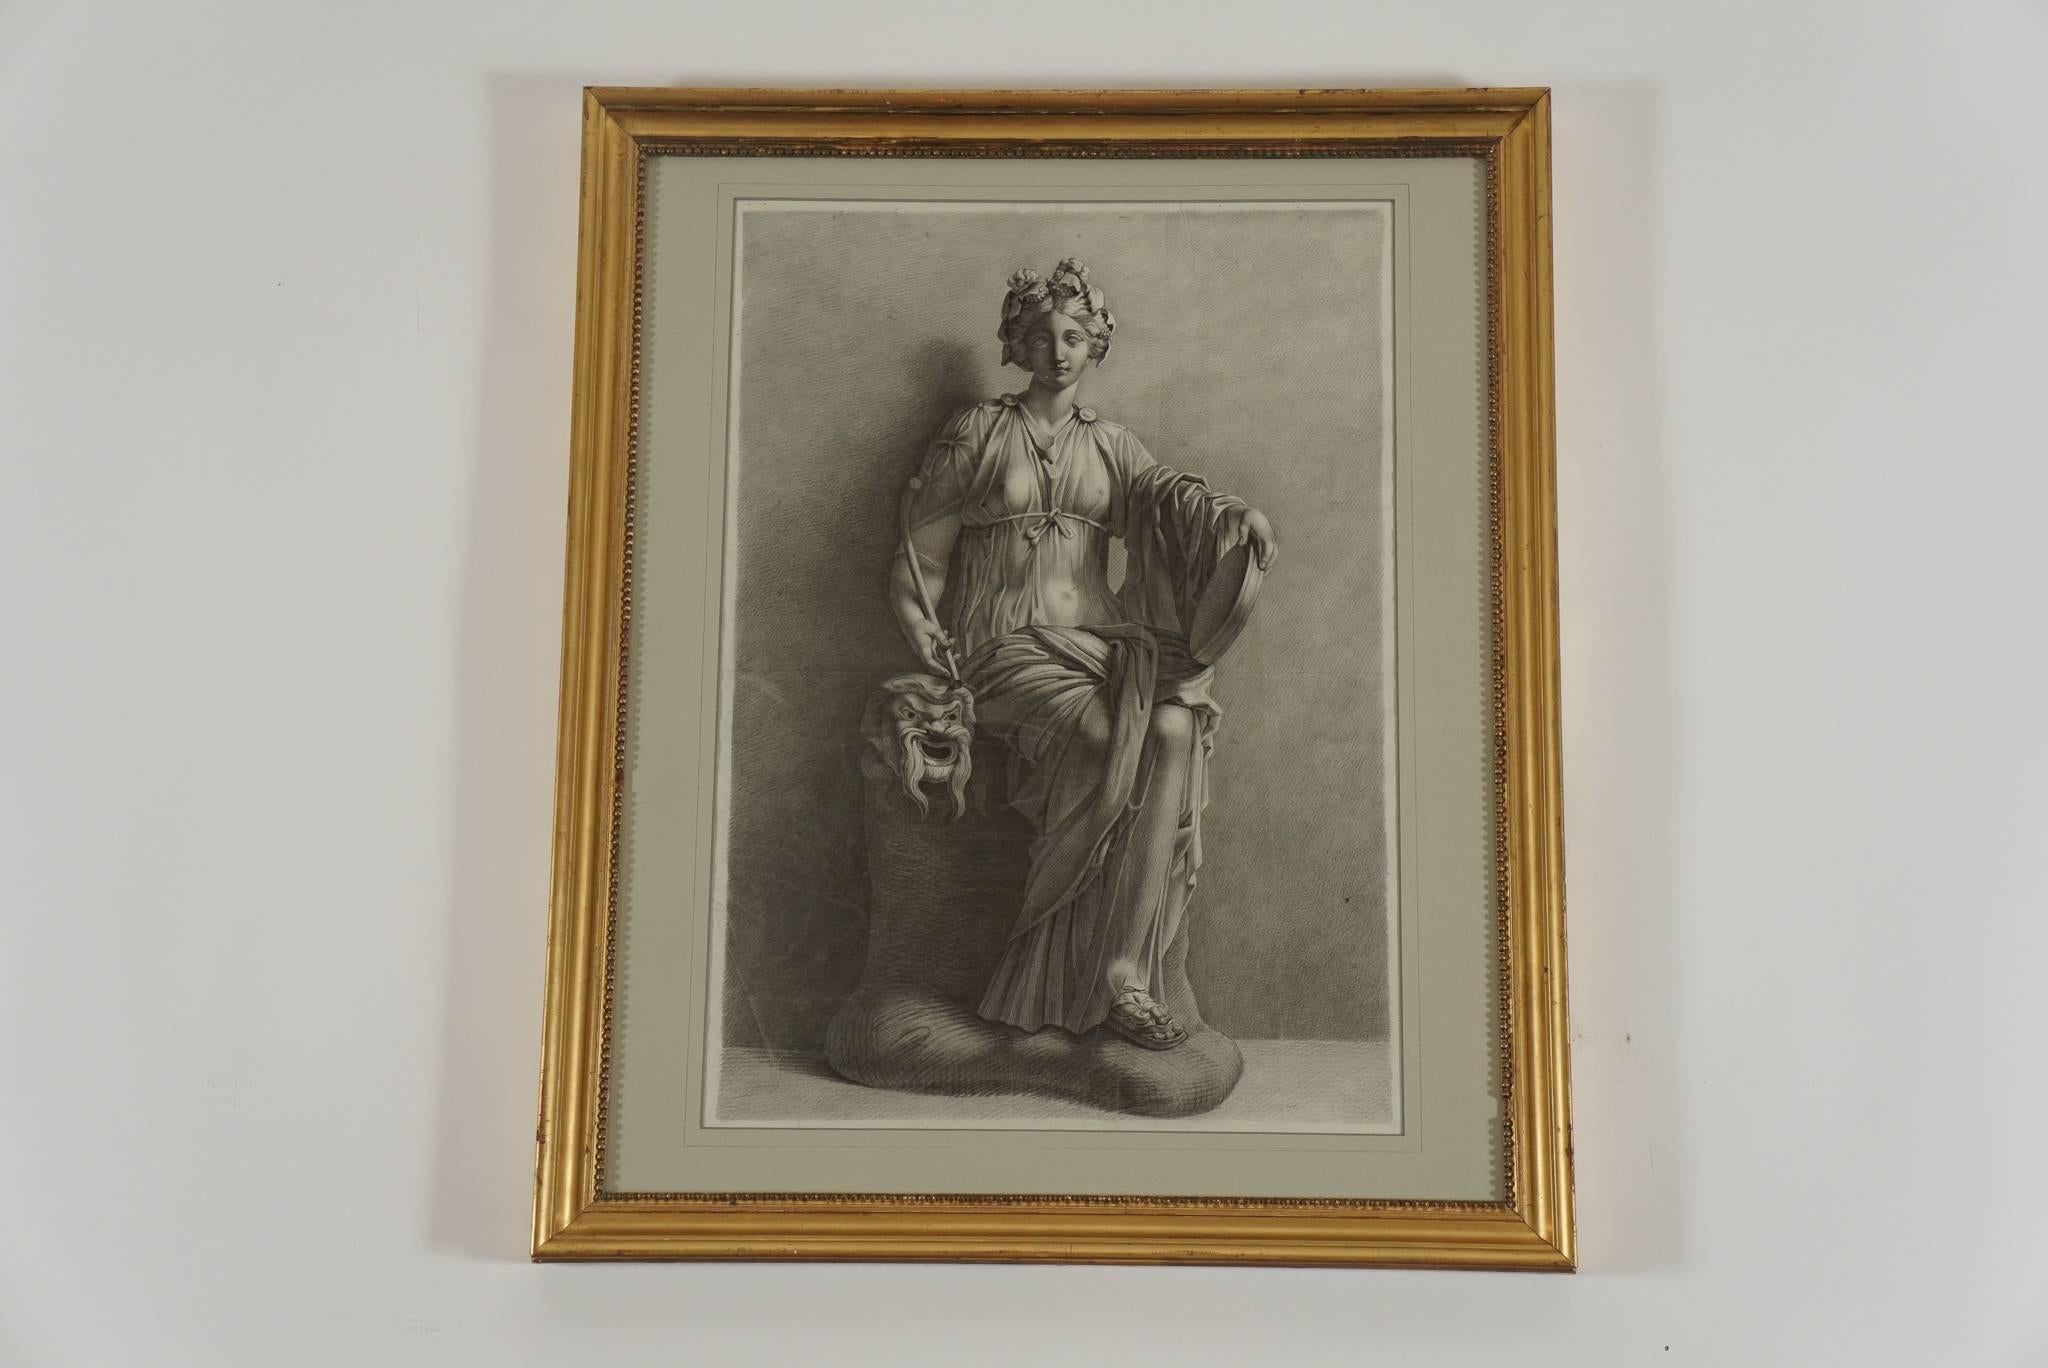 An exceptional early 19th-century charcoal on paper drawing of Thalia, the ancient Greek Muse who presided over comedy and idyllic poetry, and the daughter of Zeus and Mnemosyne; the eighth-born of the nine Muses.  Presented French matted in an